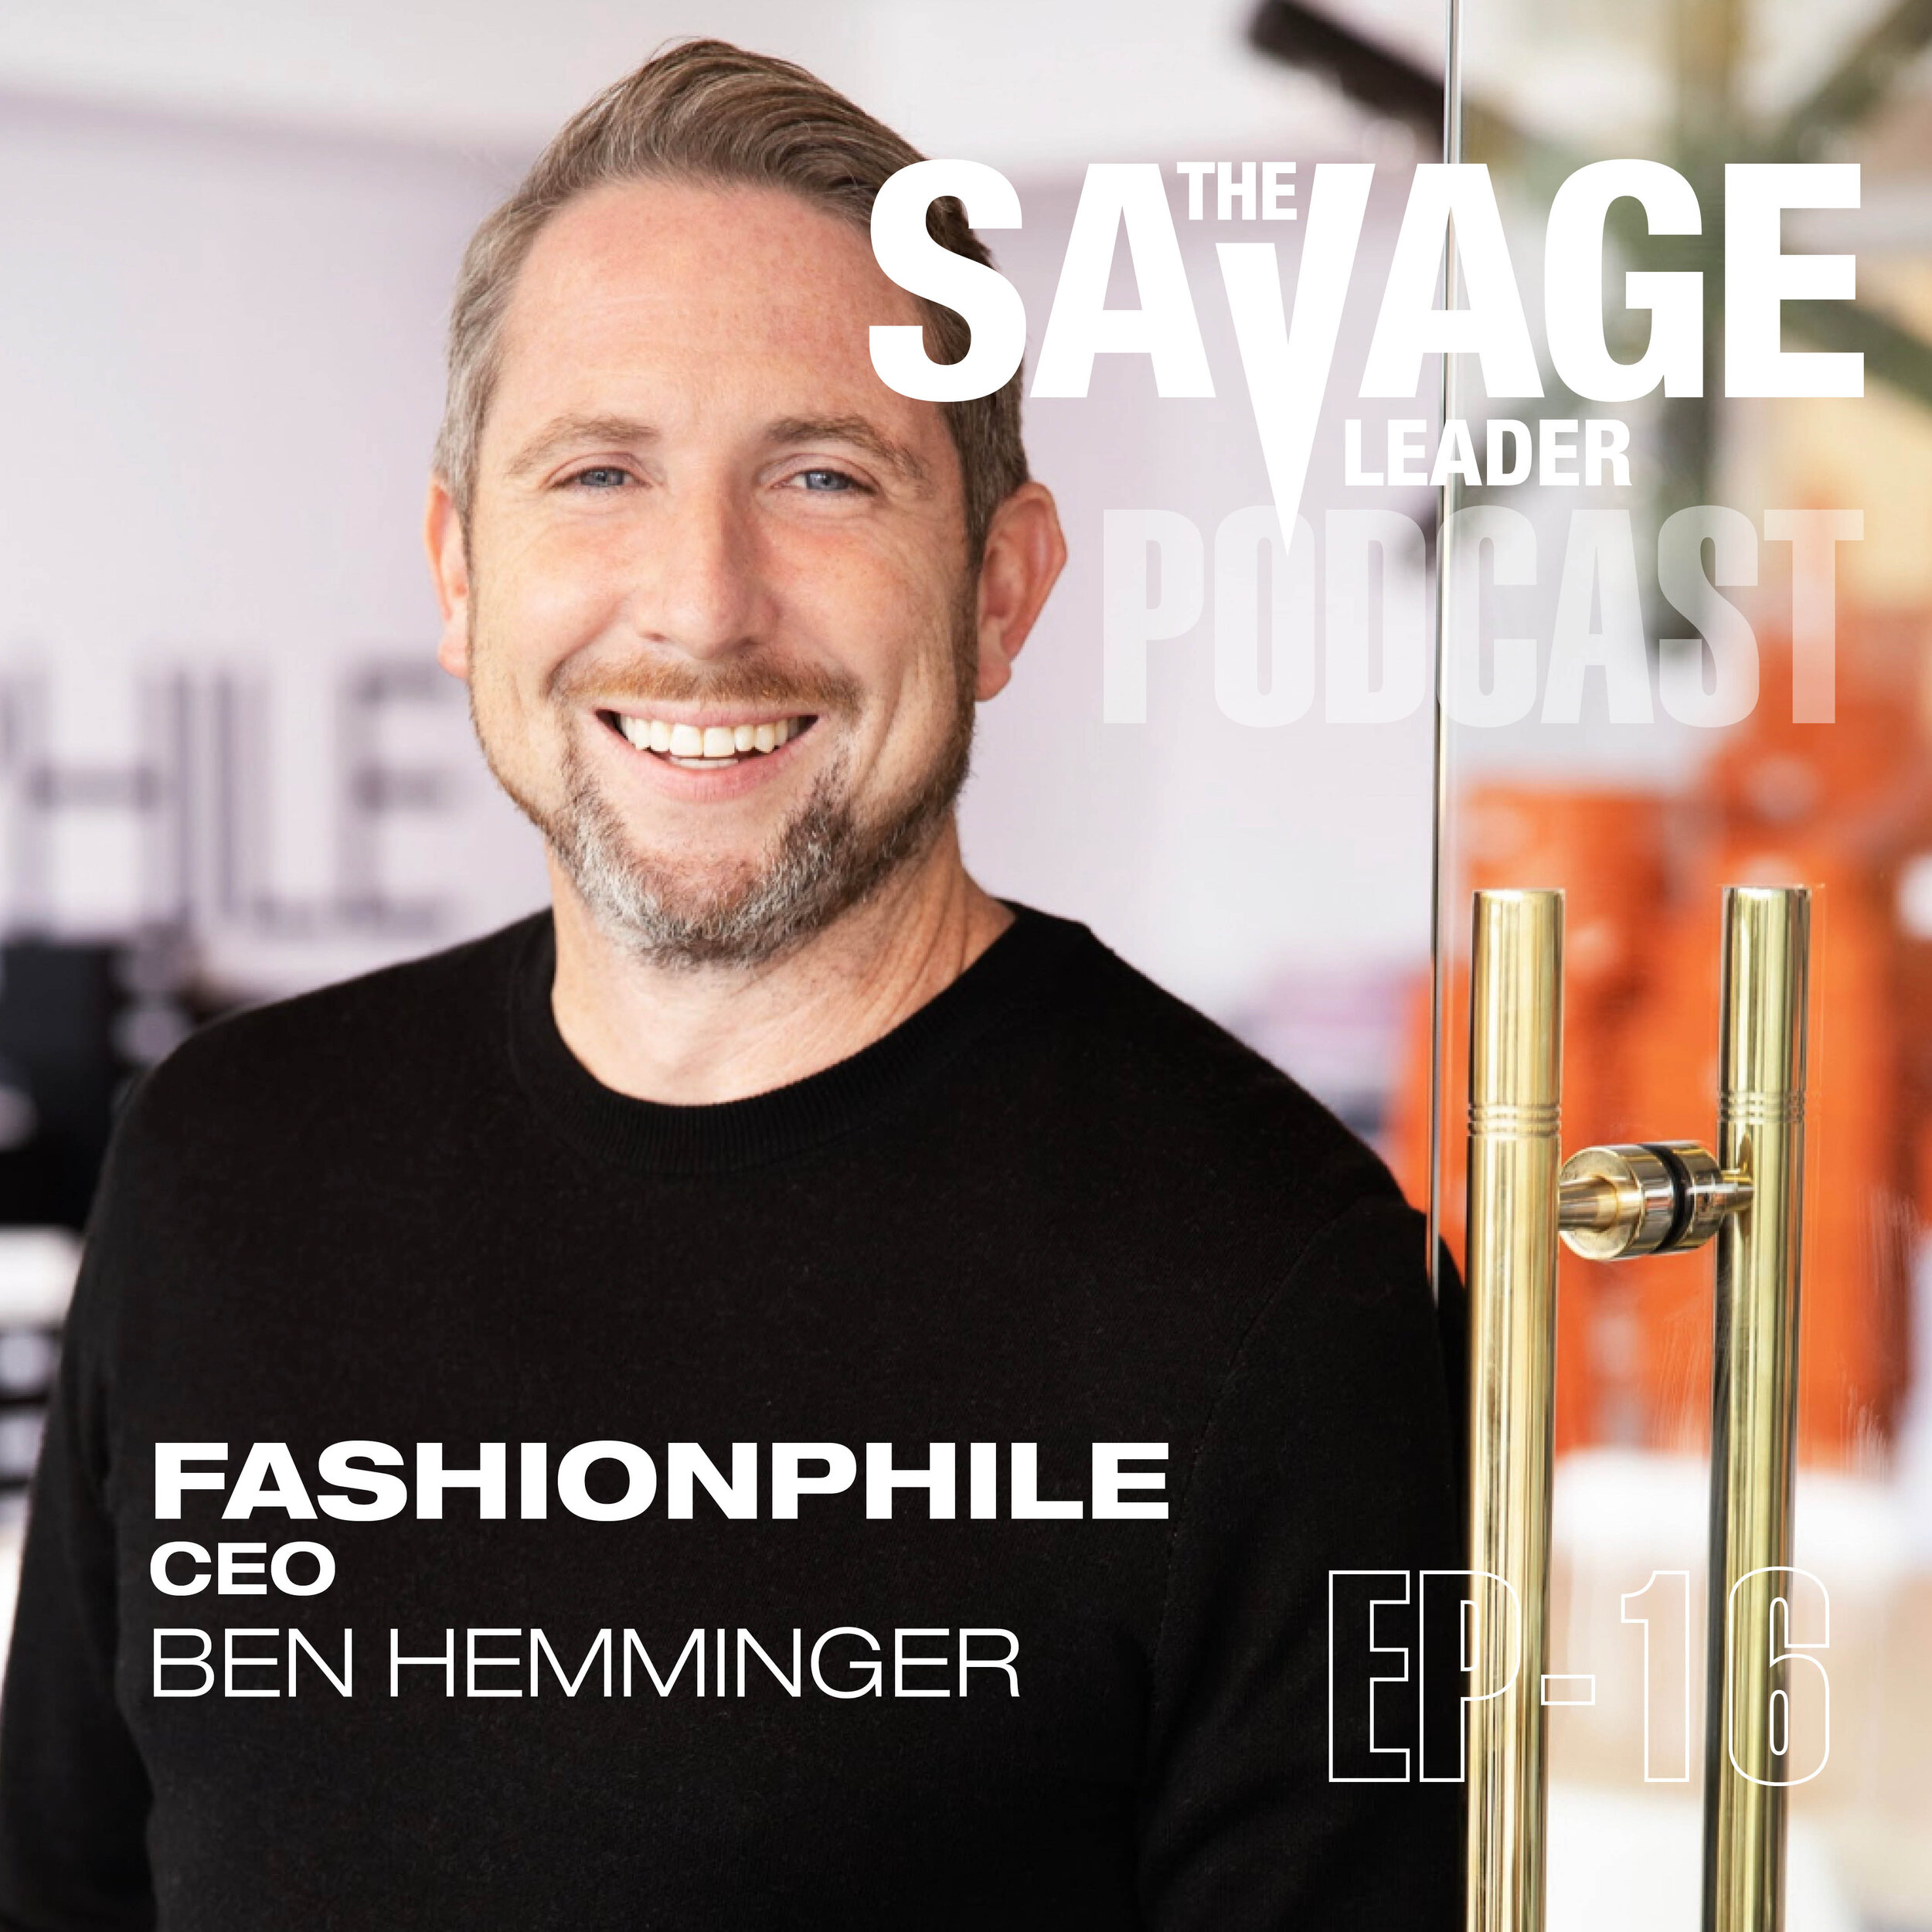 FashionPhile CEO Ben Hemminger on Driving Growth through Authentic  Relationships — The Savage Leader